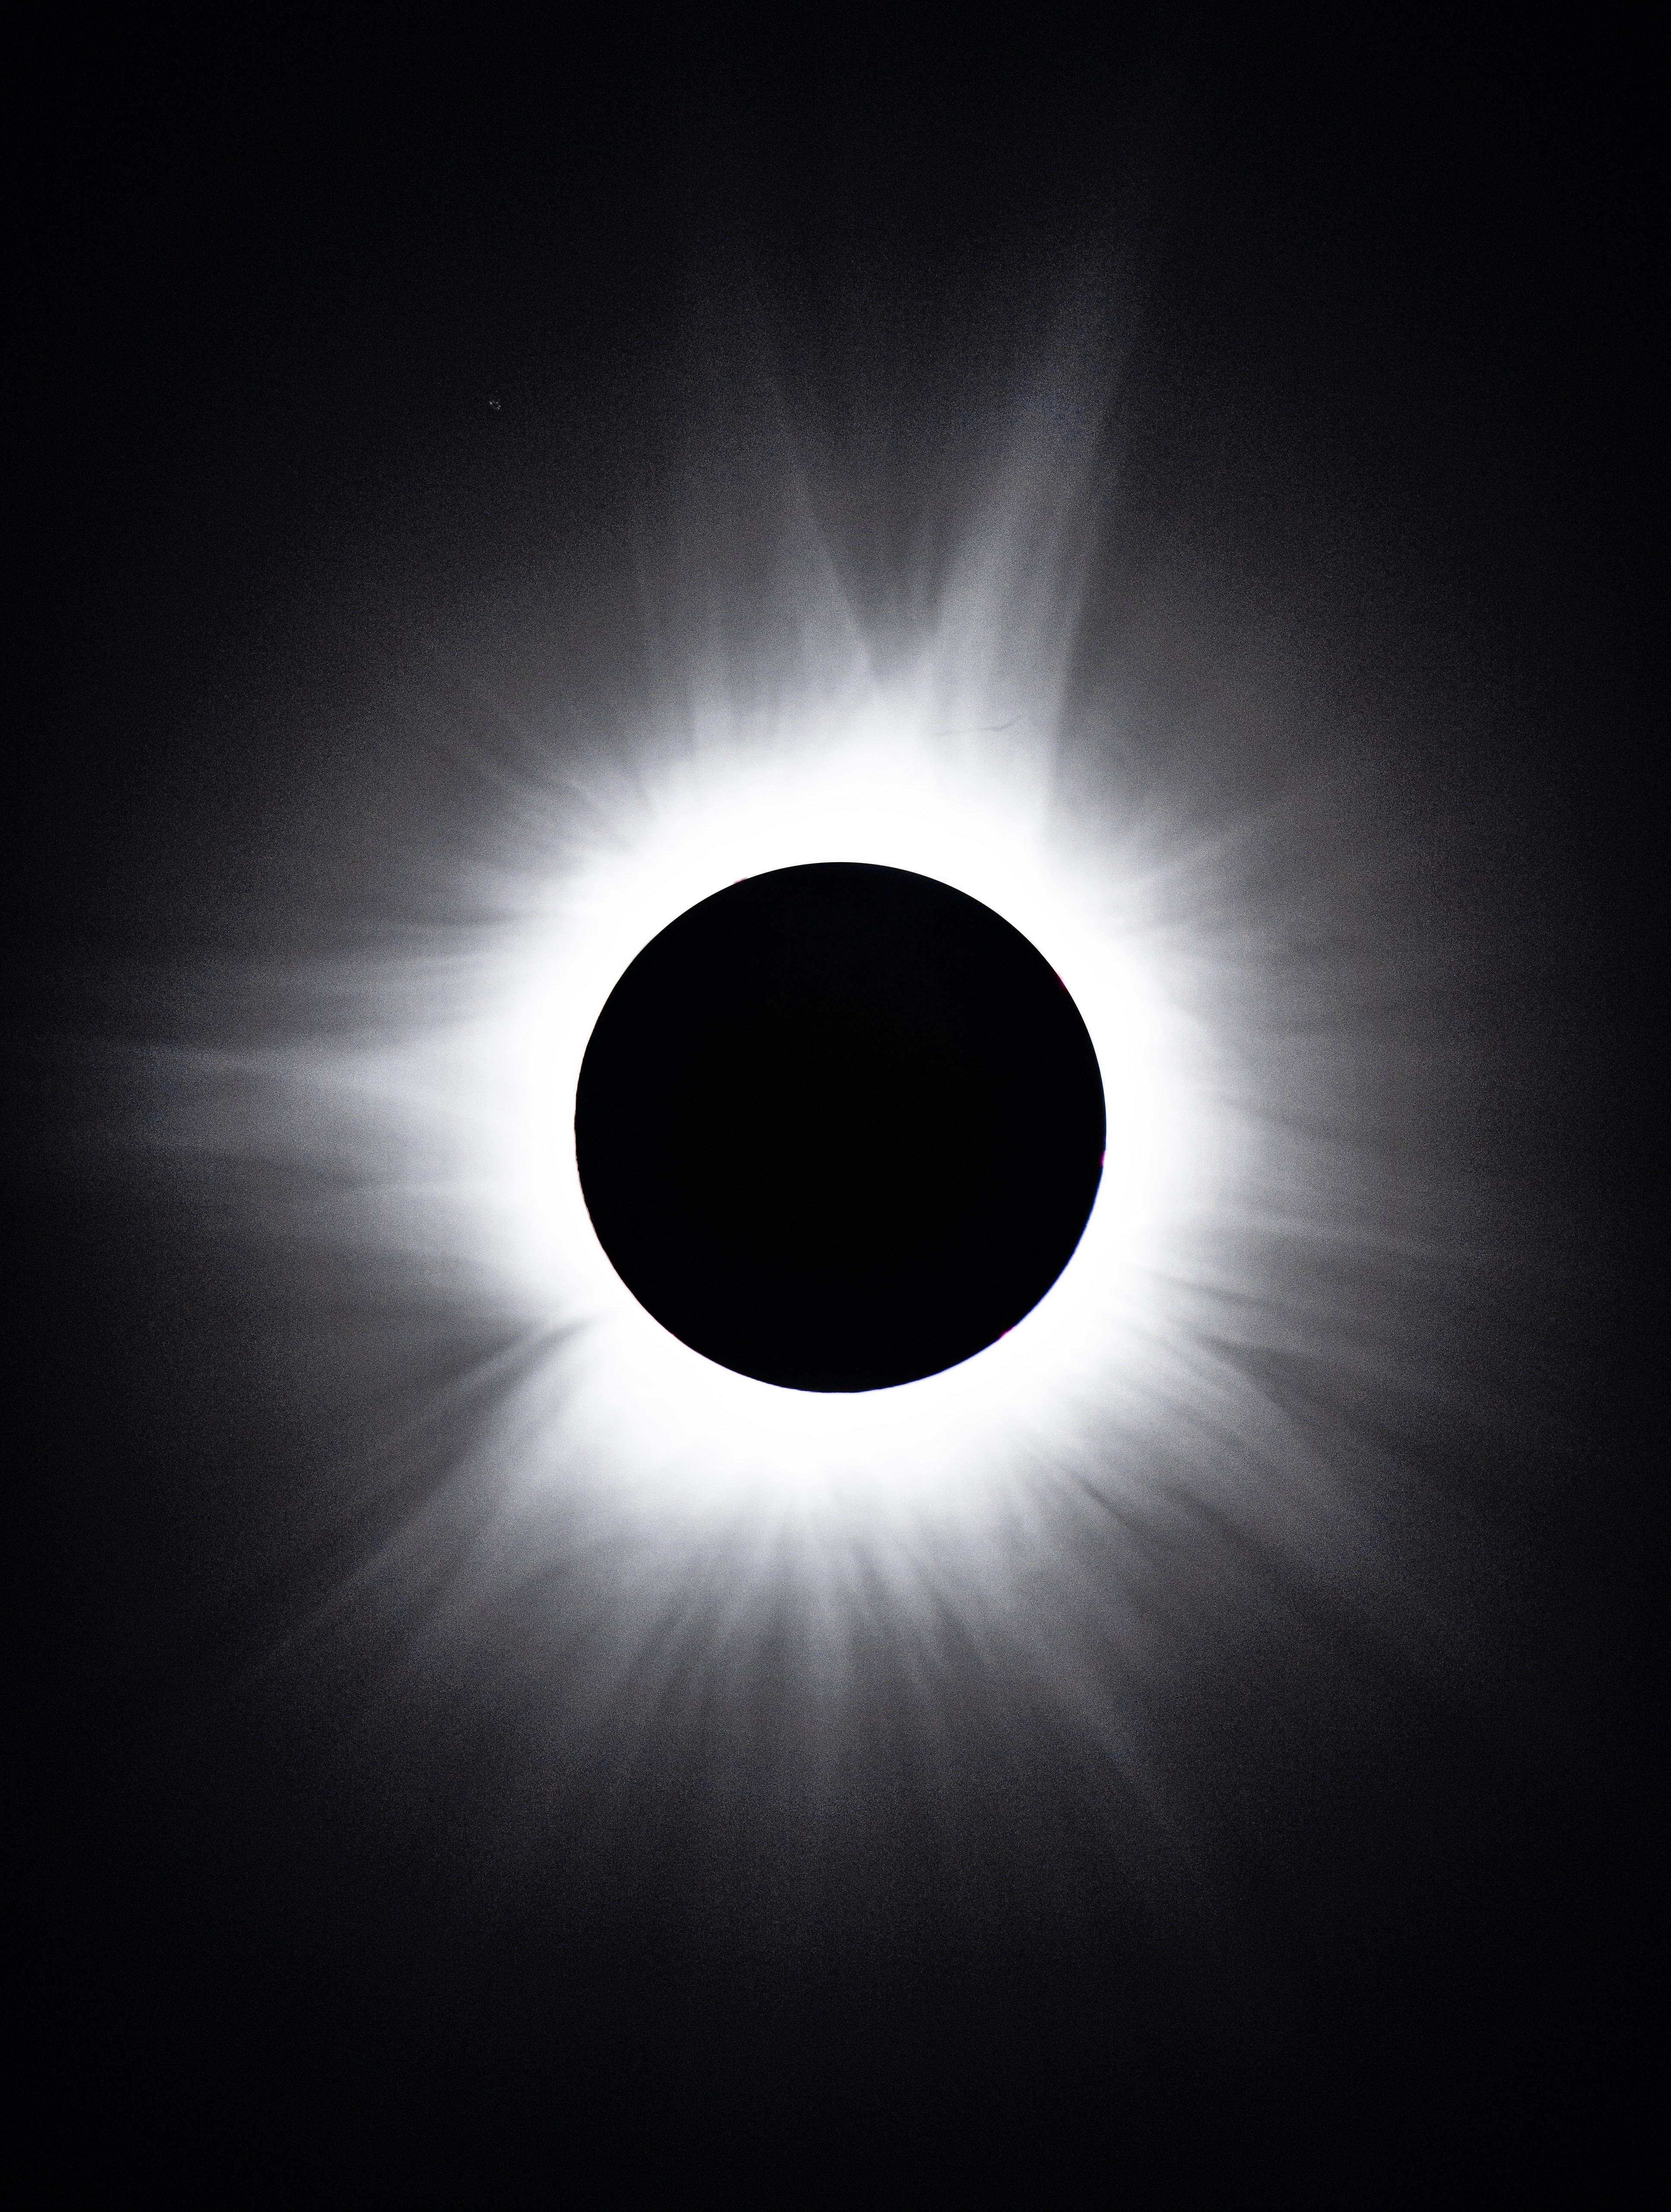 a black circle in the center which is the sun covered by the moon with a large white halo surrounding it, this is the corona, the sun's outer atmosphere.